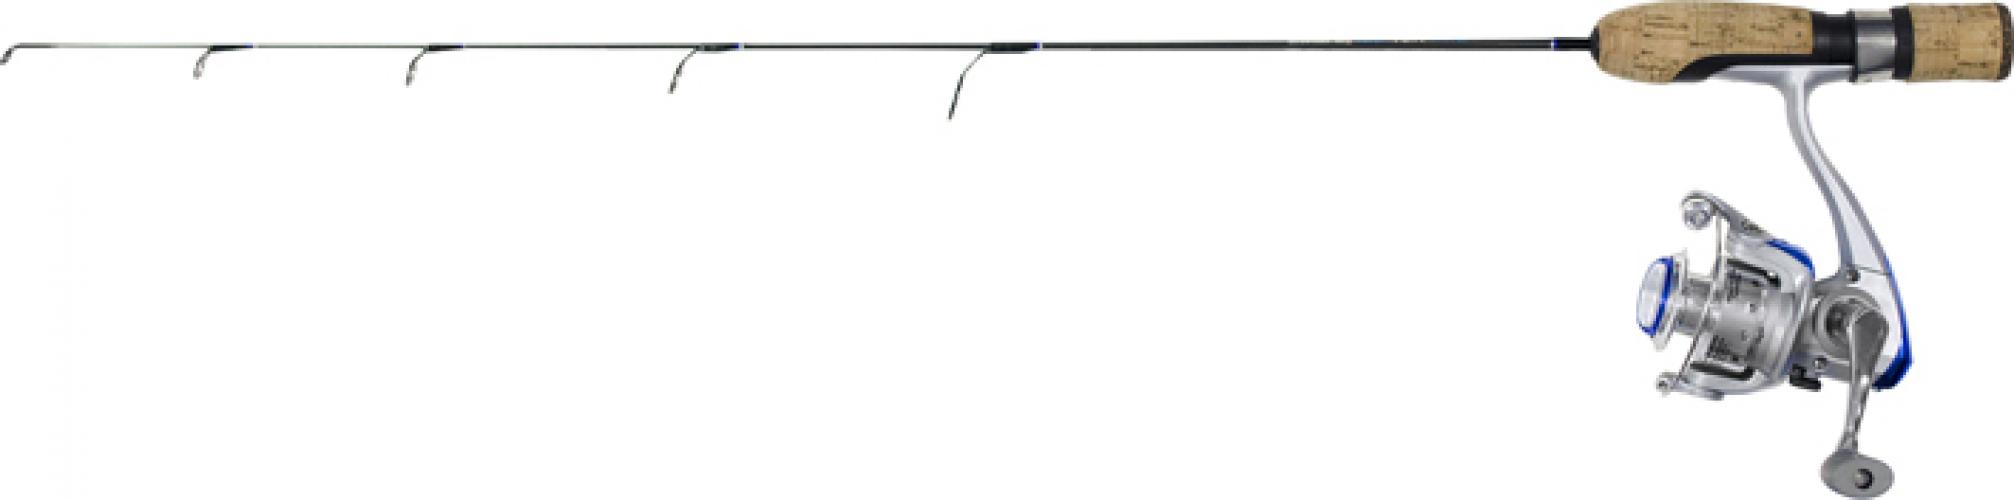 26" Med Action Pro Combo